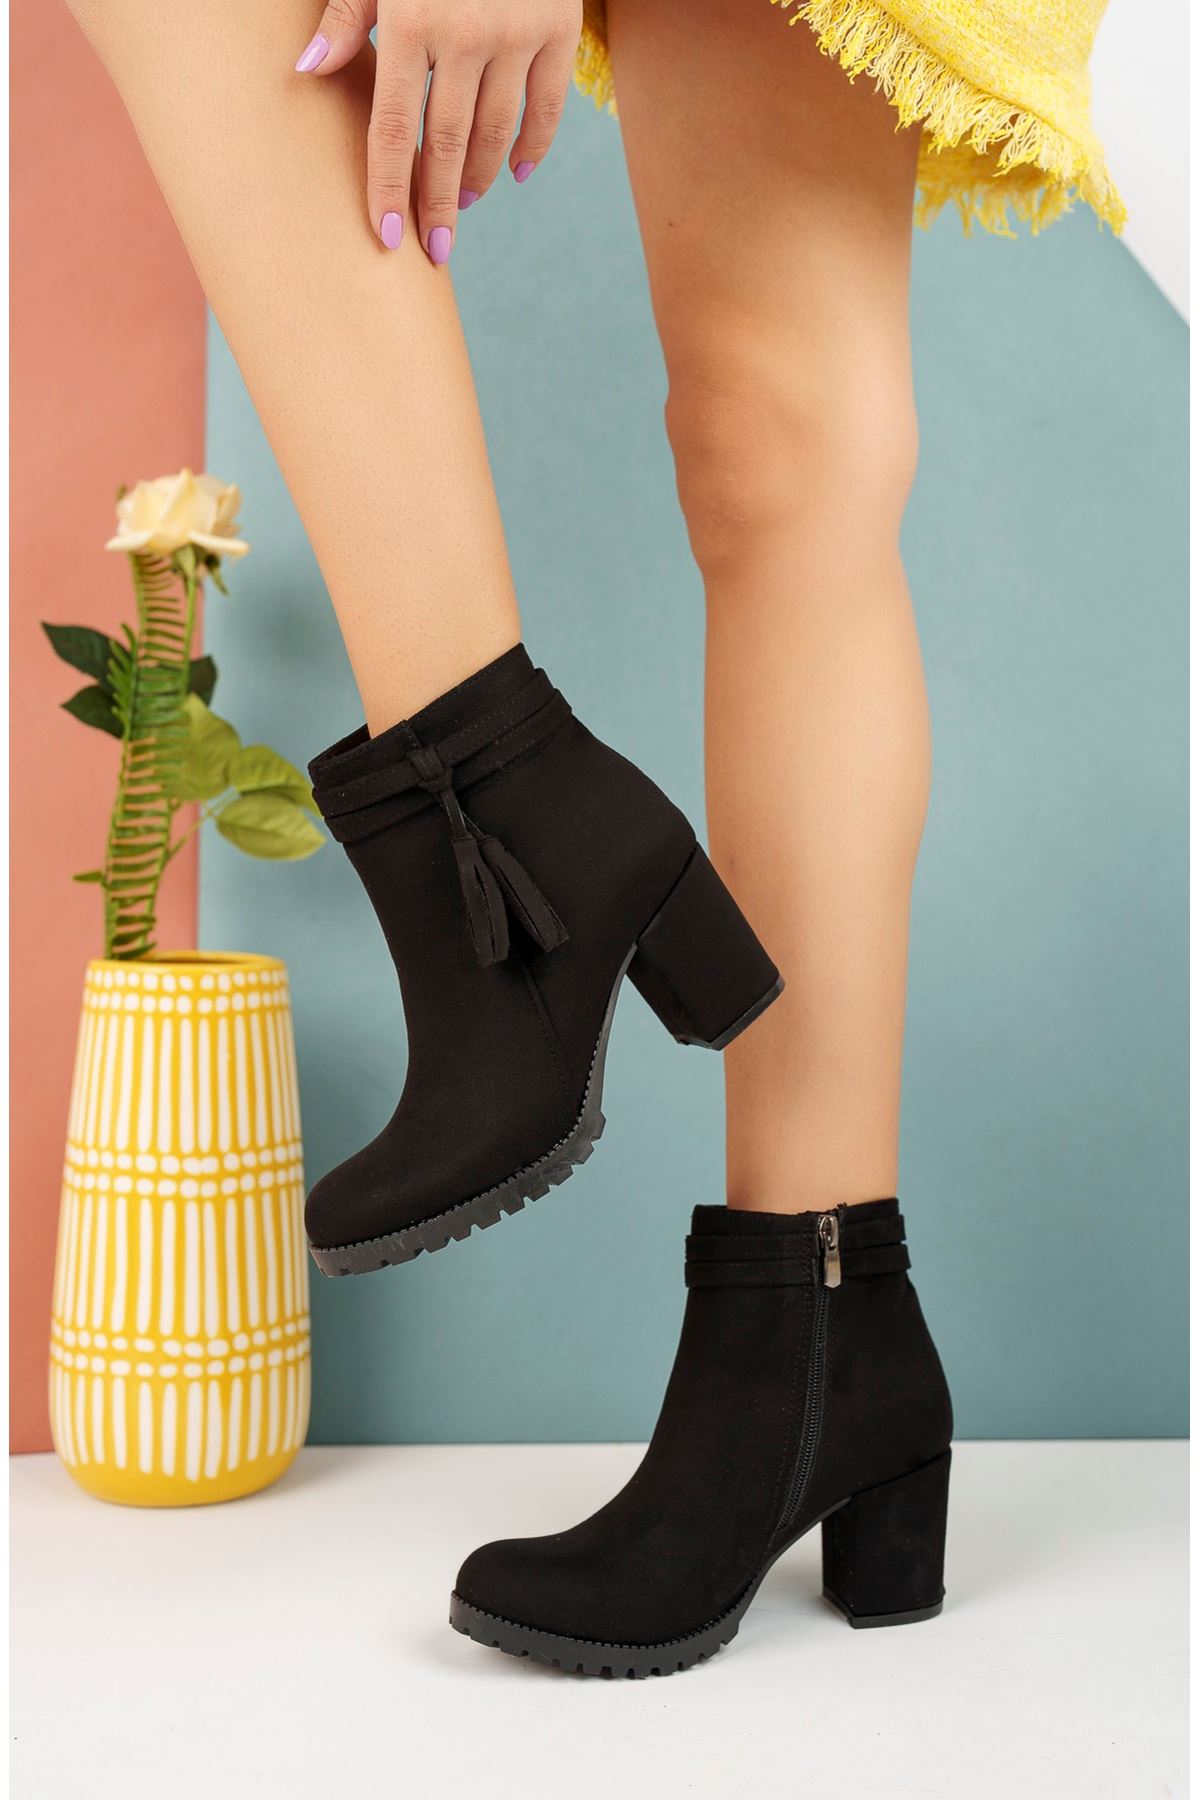 Black Suede Women's Boots with Tassels